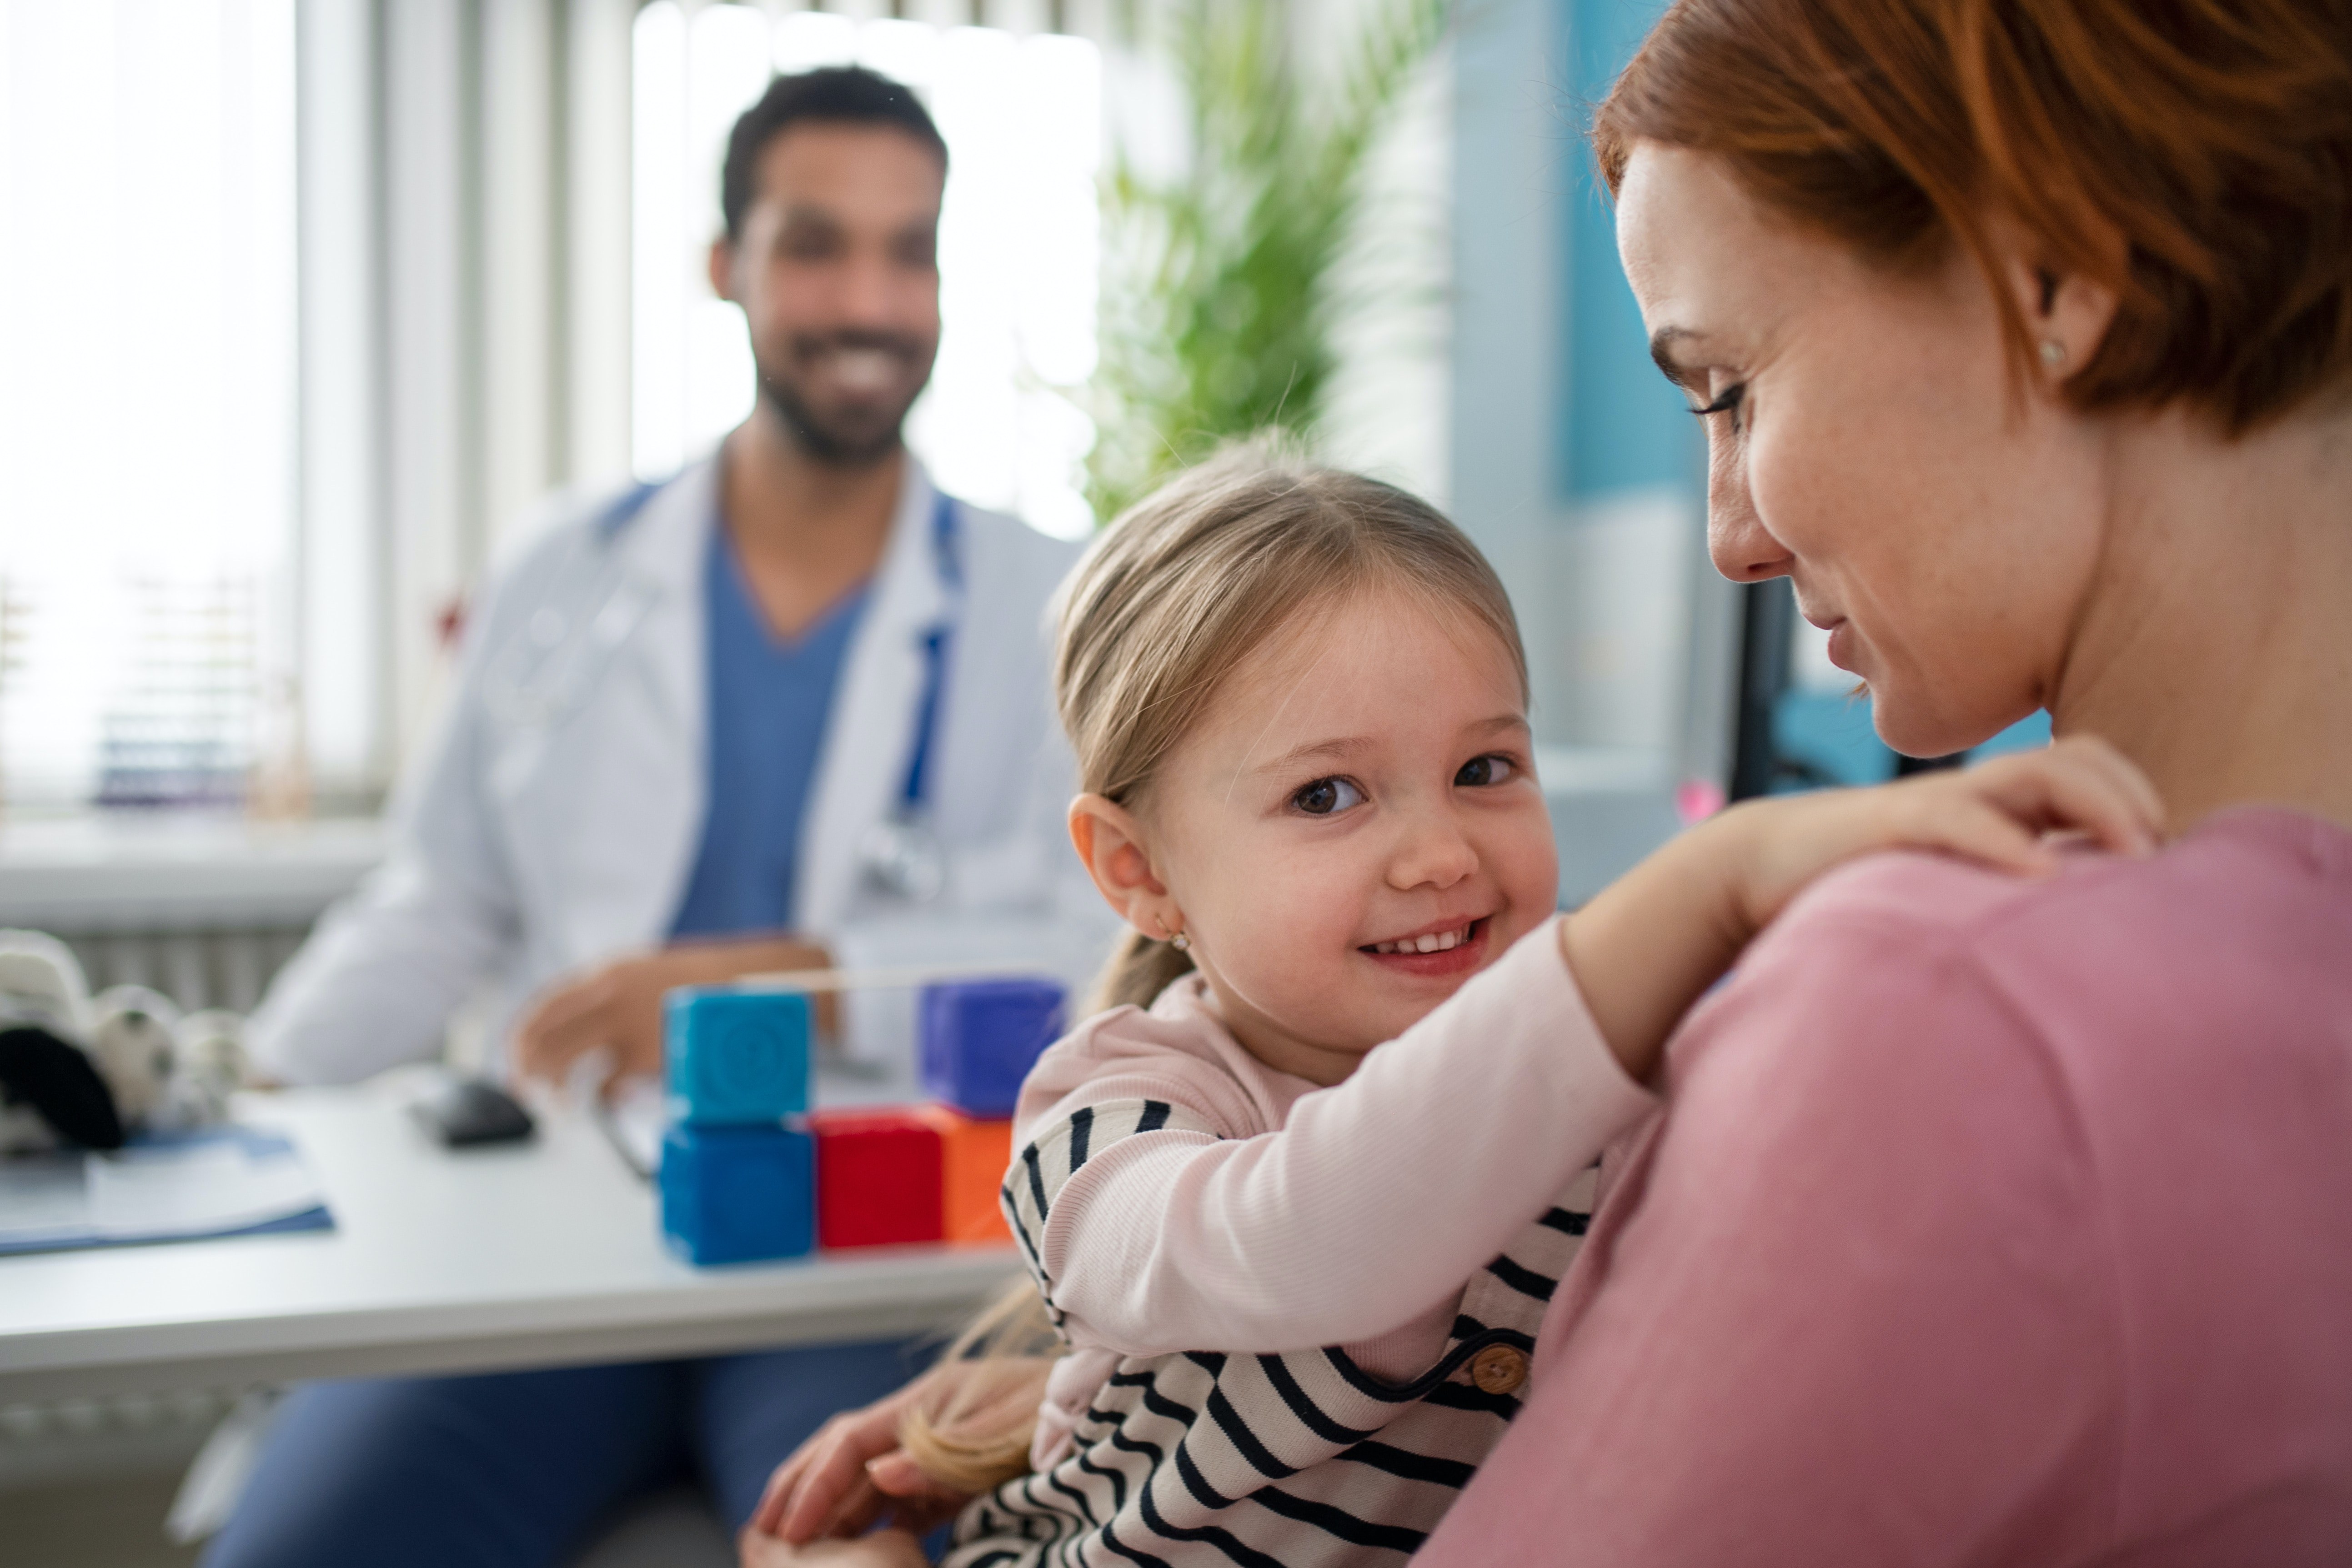 a doctor, a pediatric patient and the patient's mother smiling and conversing